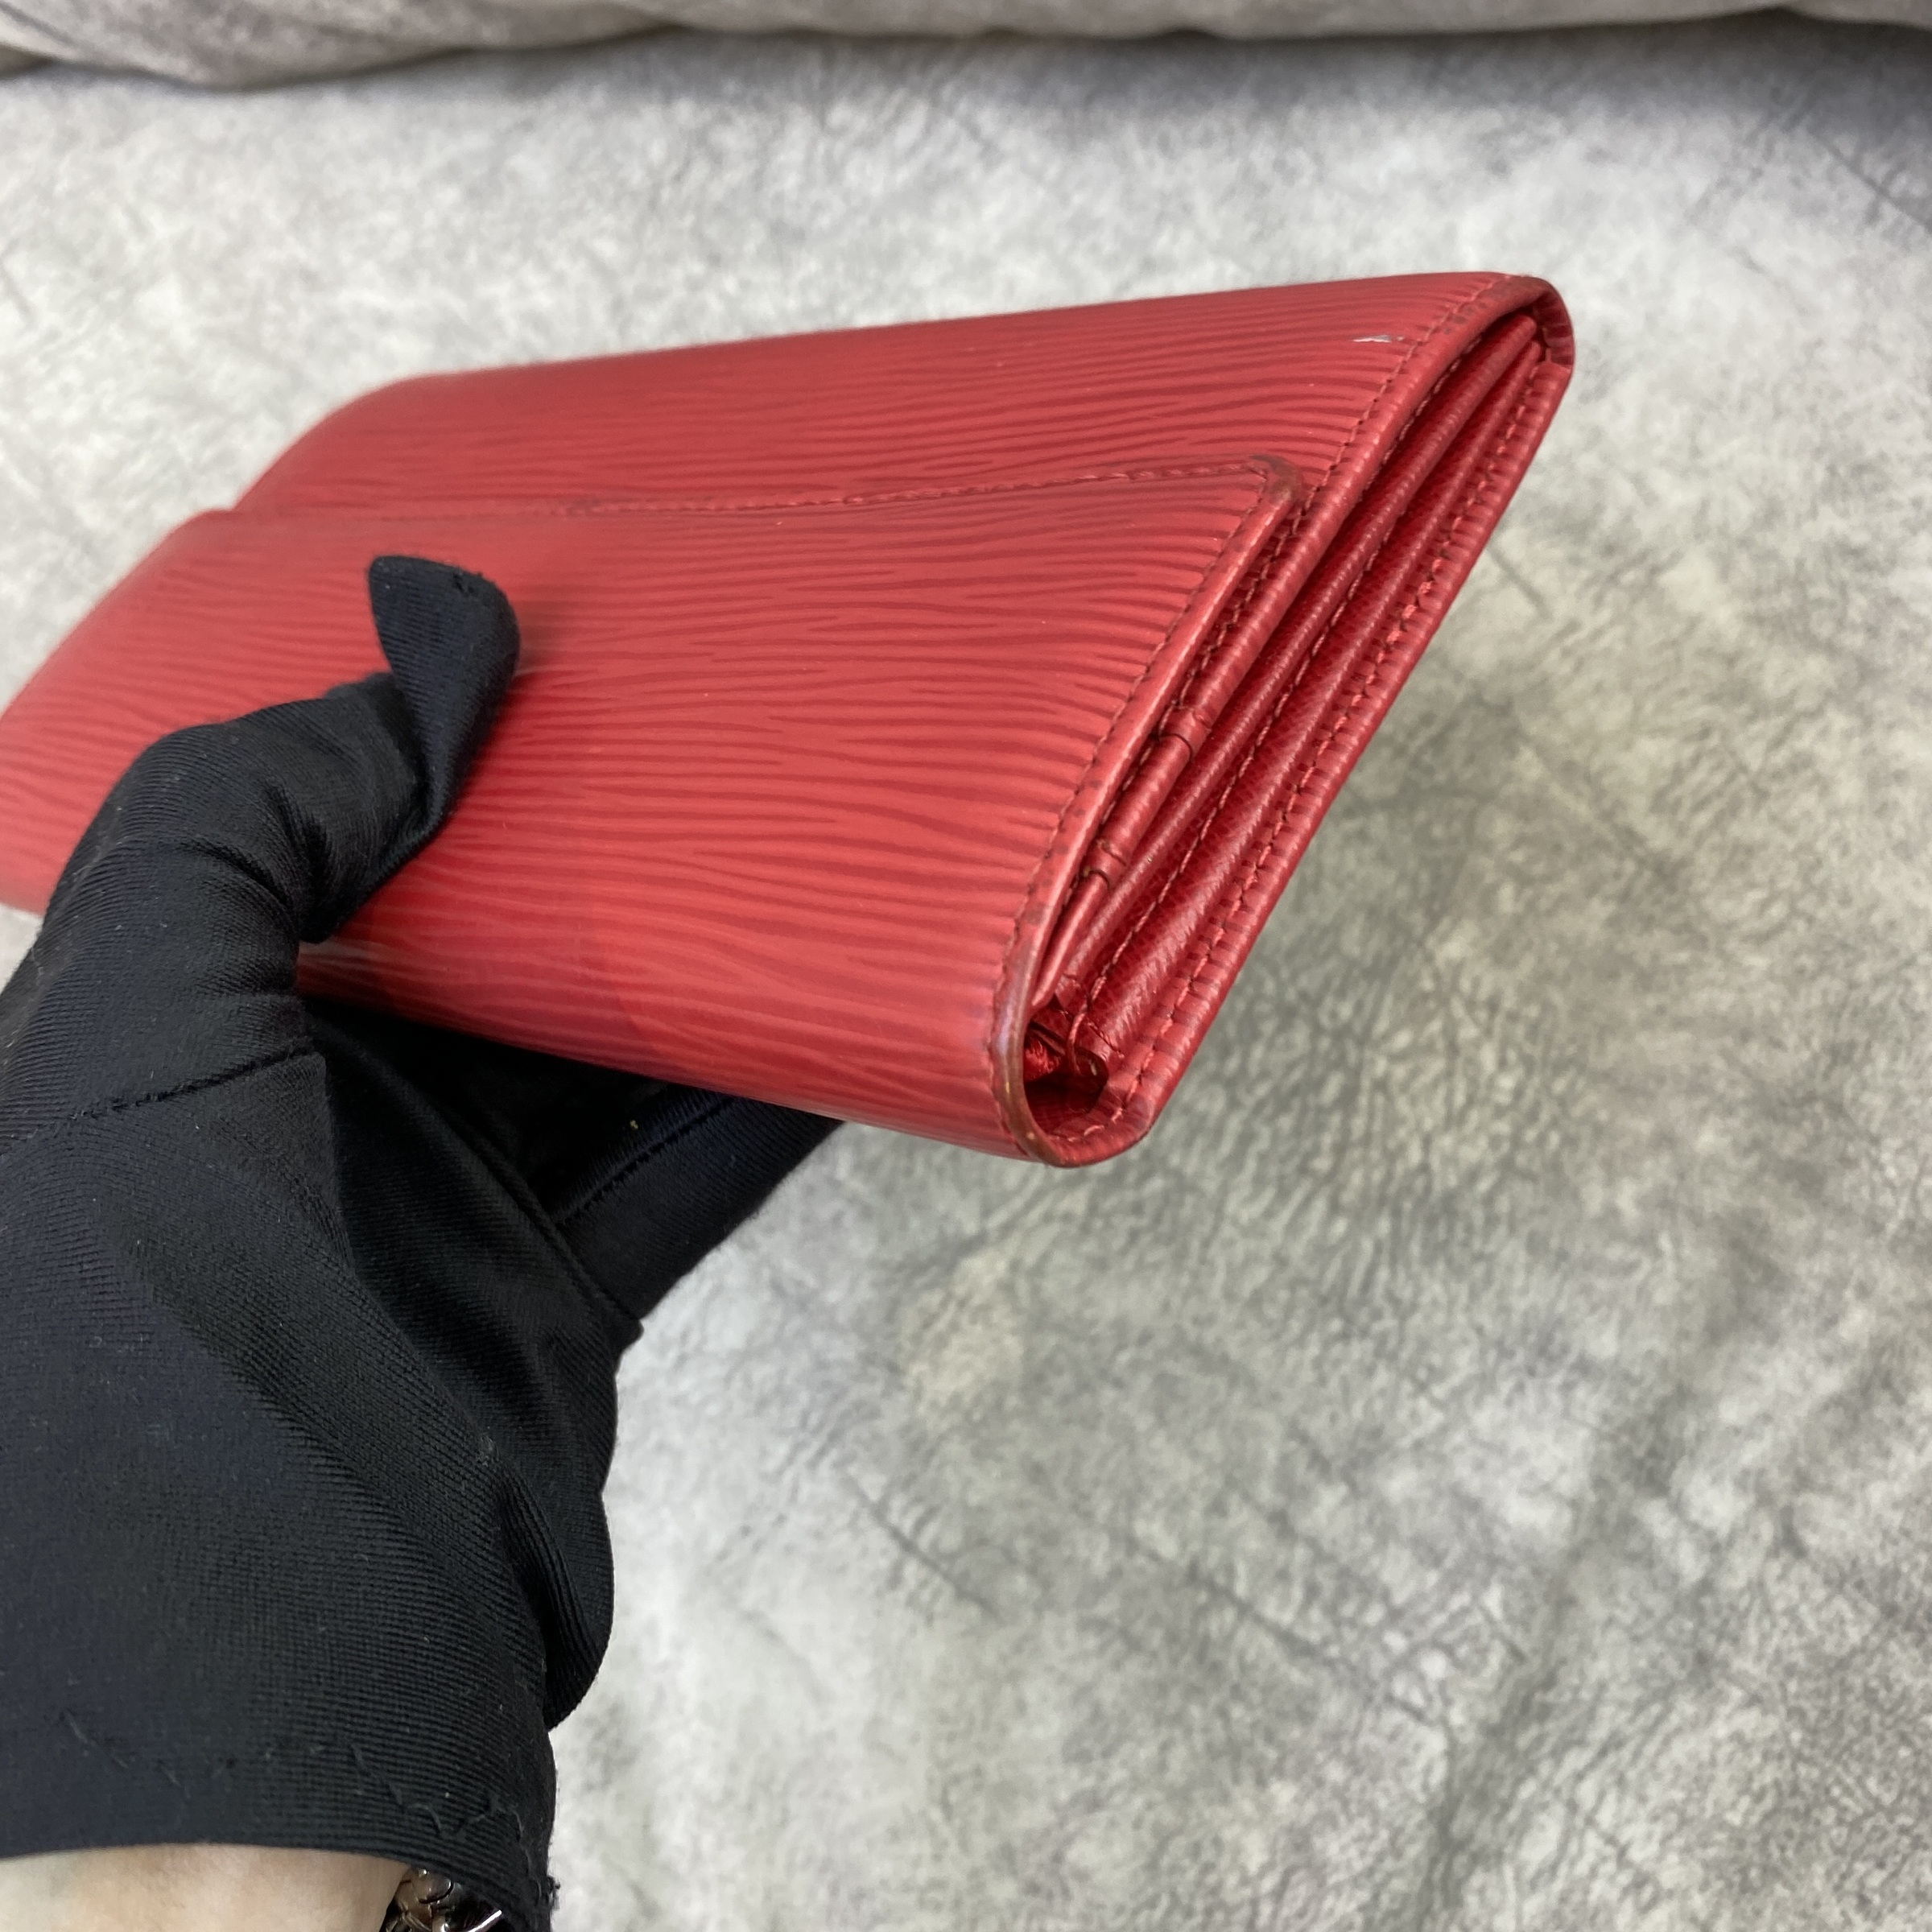 PREOWNED LOUIS VUITTON LONG WALLET EPI LEATHER RED